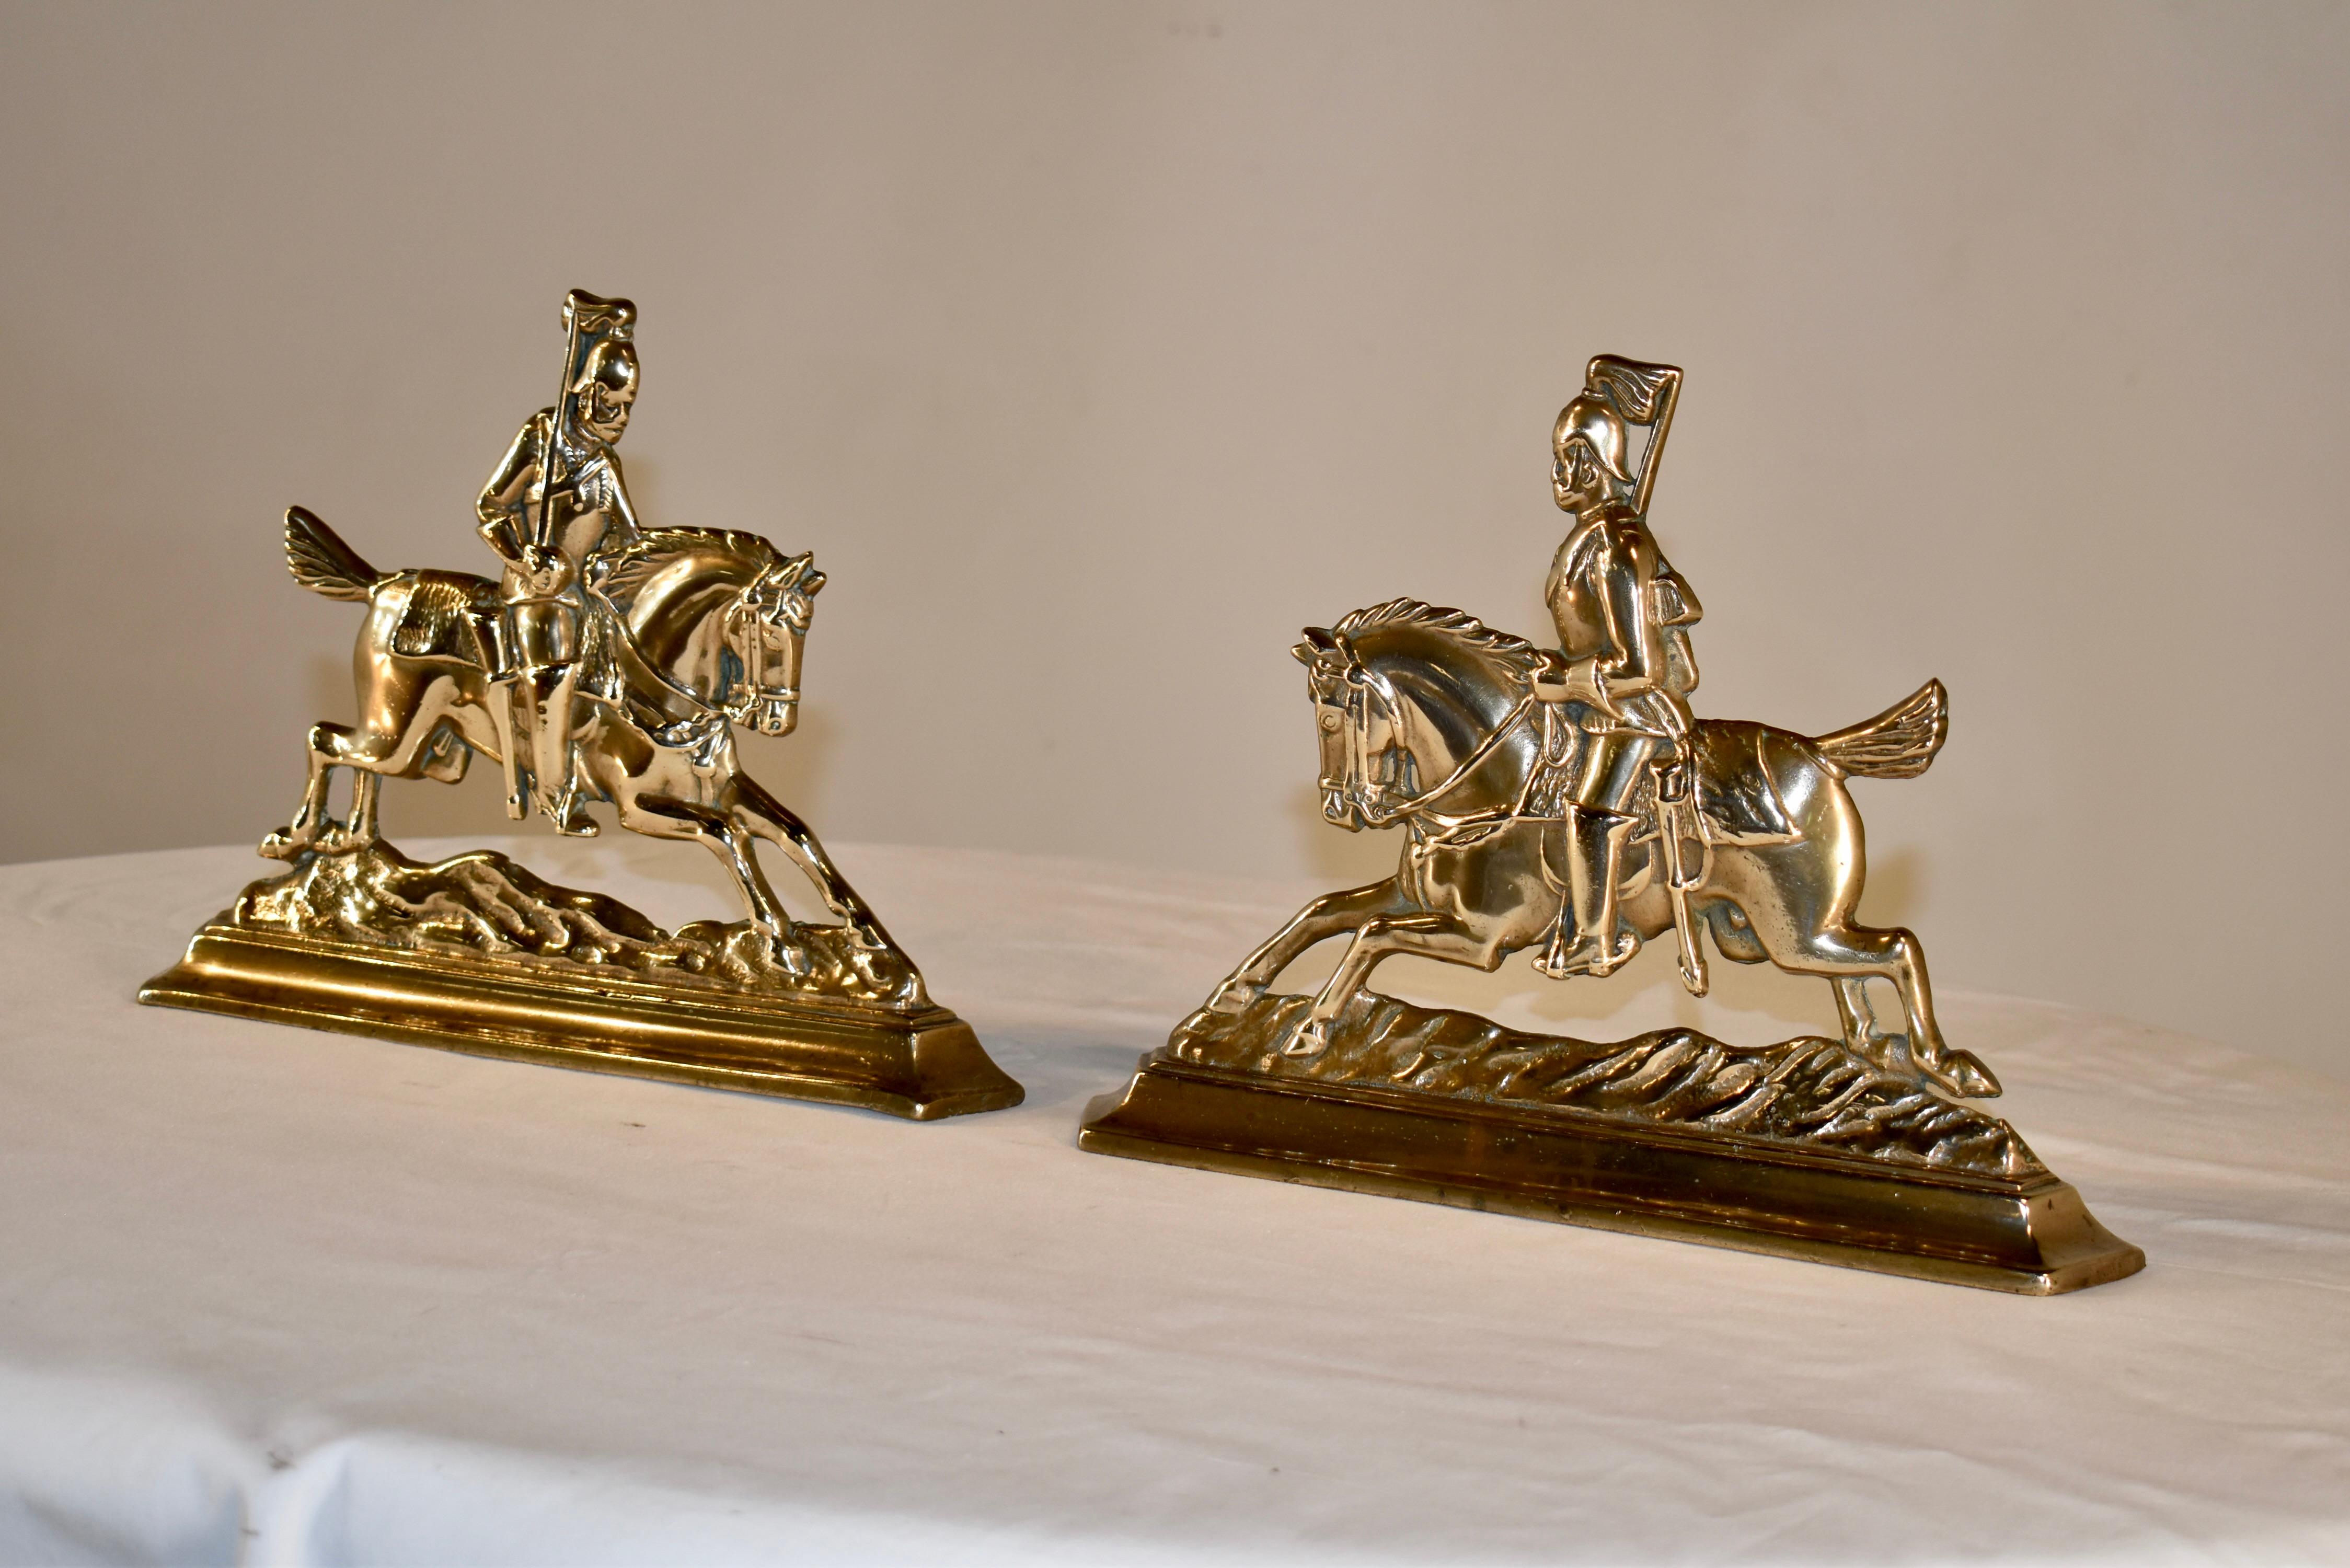 Pair of lovely 19th century brass mantle decorations from England. They are a wonderfully molded pair of soldiers mounted on horseback and holding flags. they look as if the are riding swiftly to carry messages over rough terrain. They have